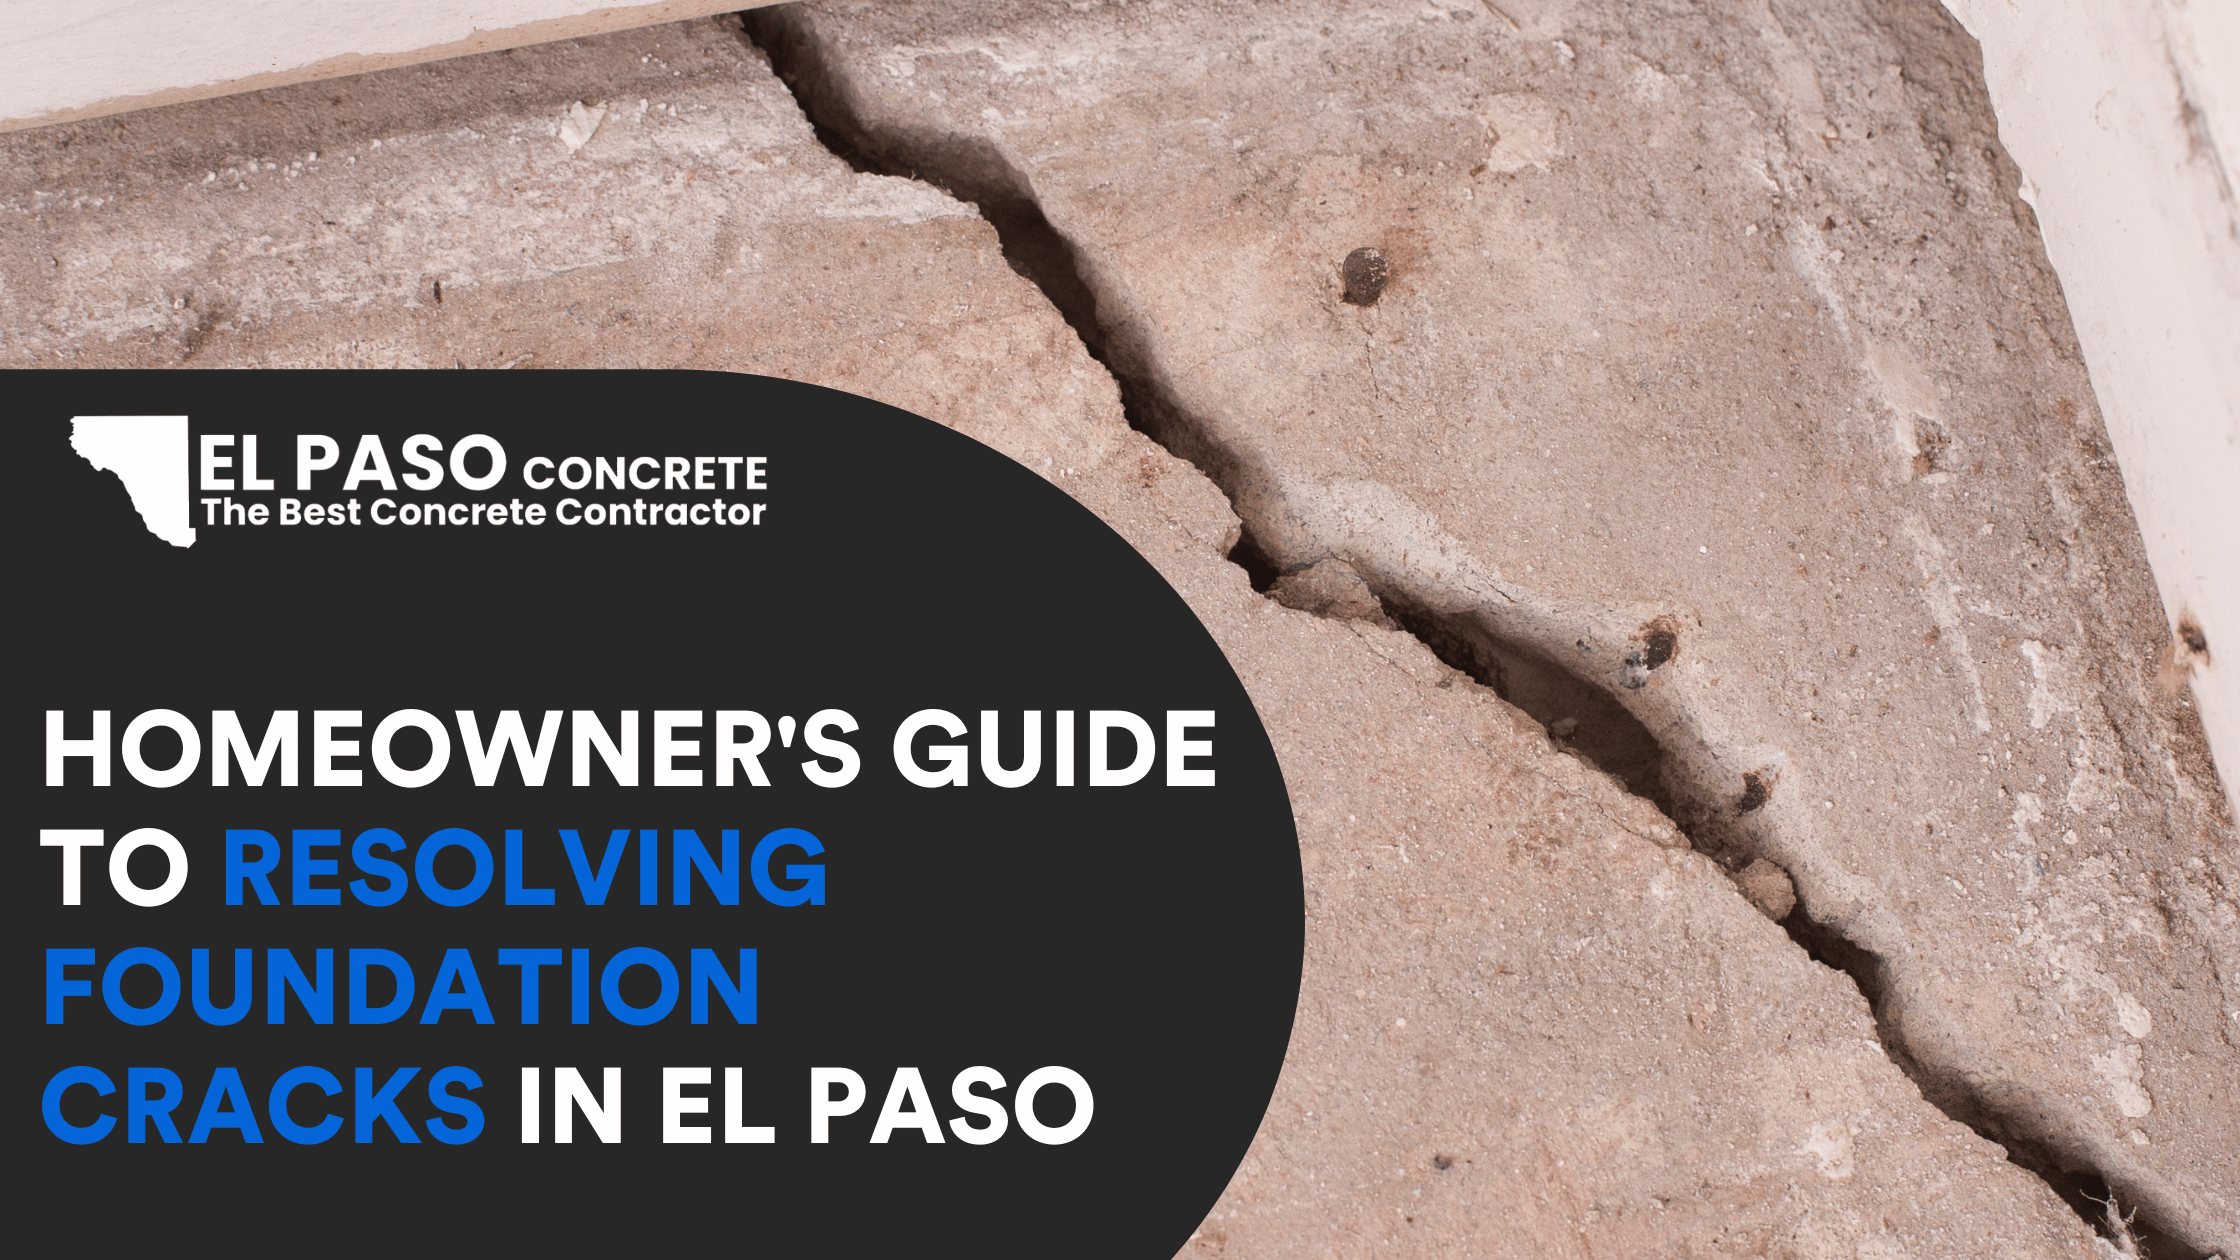 Homeowner’s Guide to Resolving Foundation Cracks in El Paso